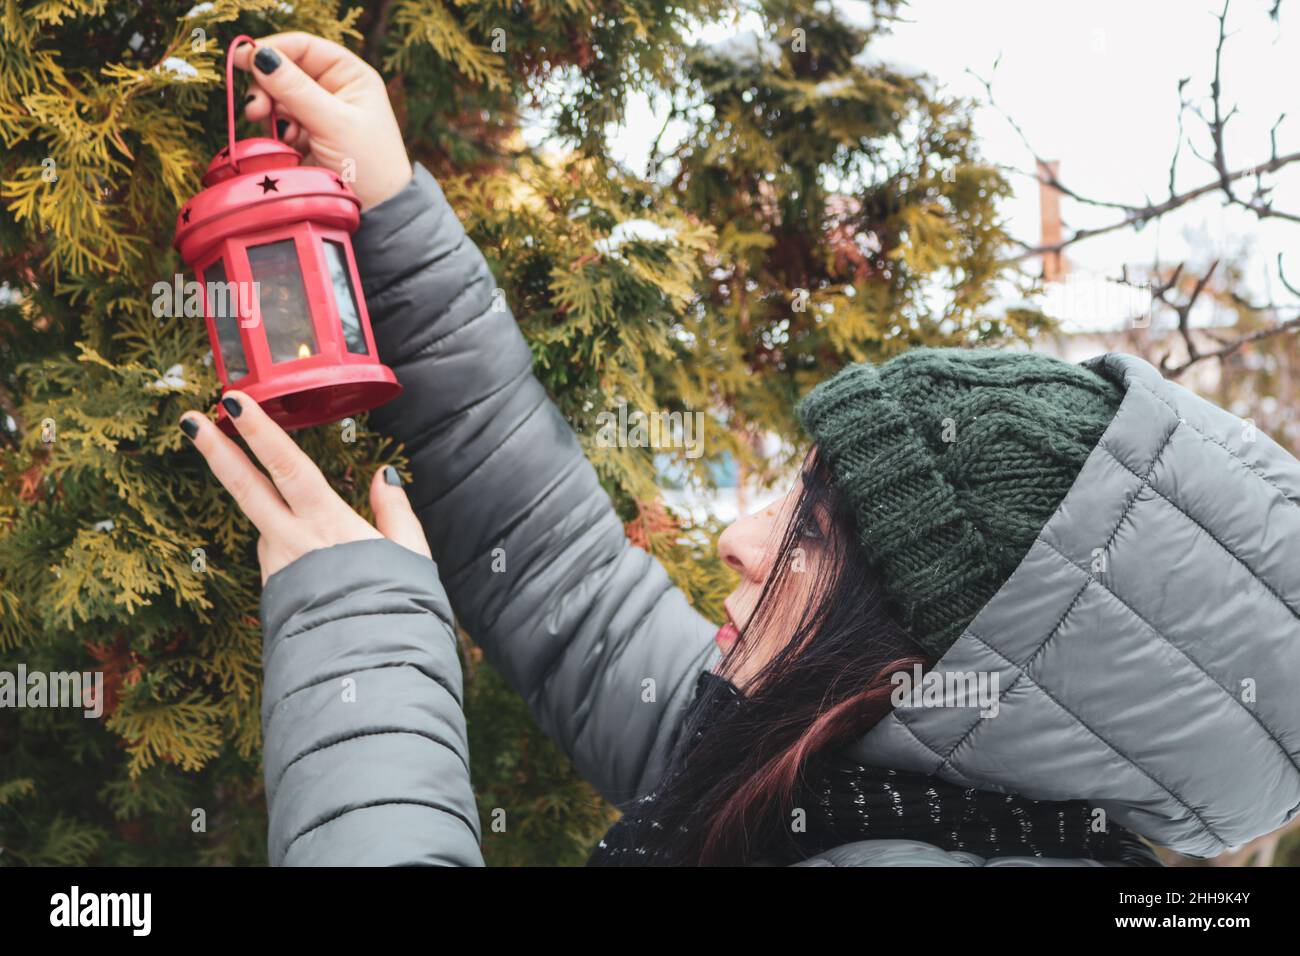 A girl with a red lantern Stock Photo